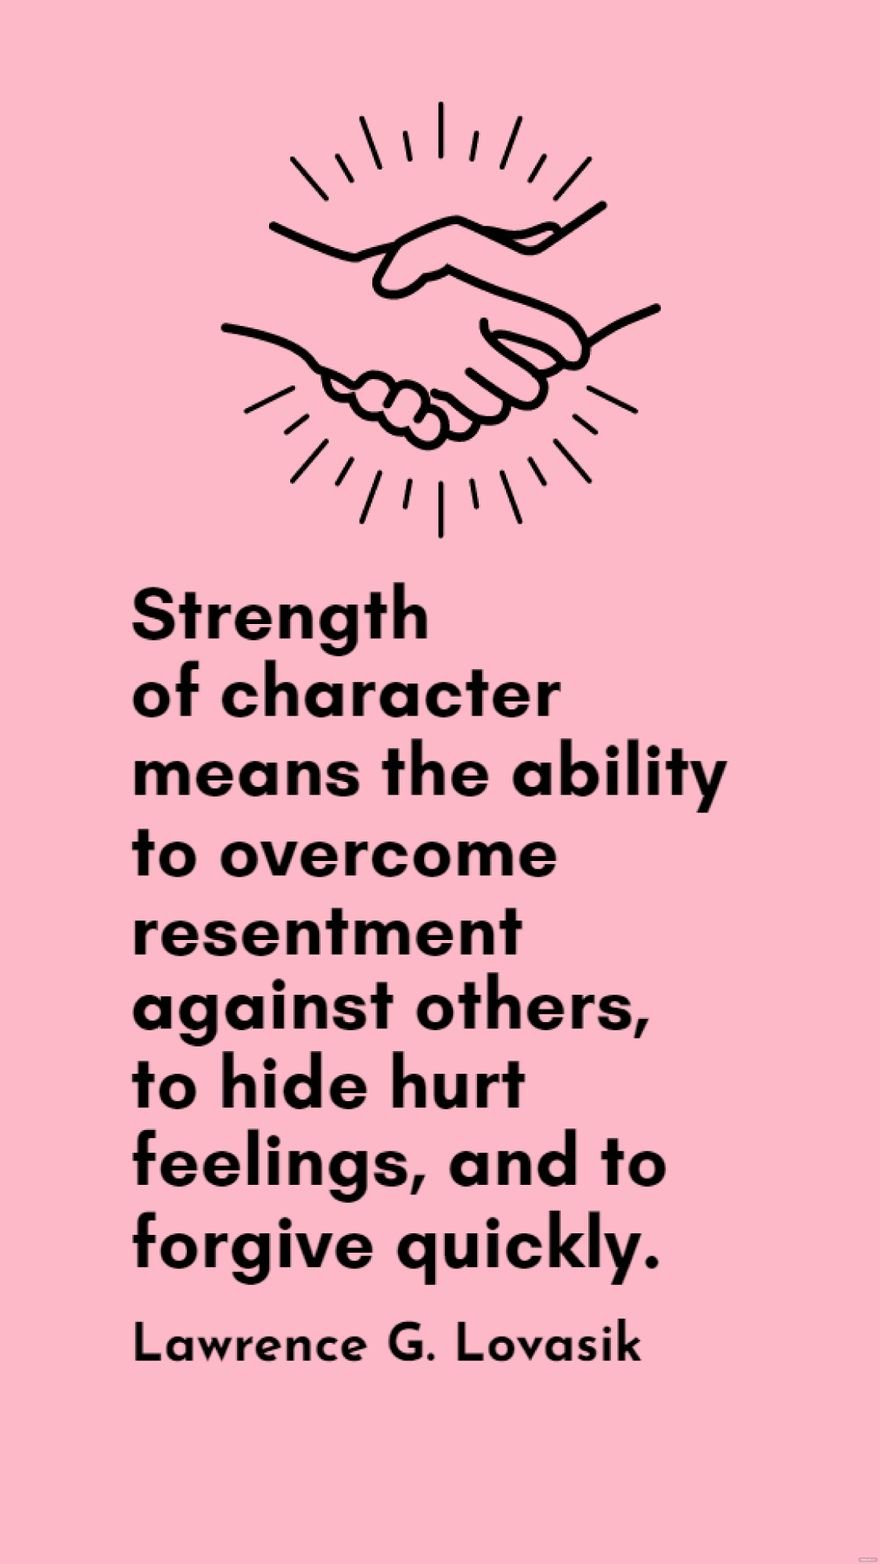 Lawrence G. Lovasik - Strength of character means the ability to overcome resentment against others, to hide hurt feelings, and to forgive quickly.